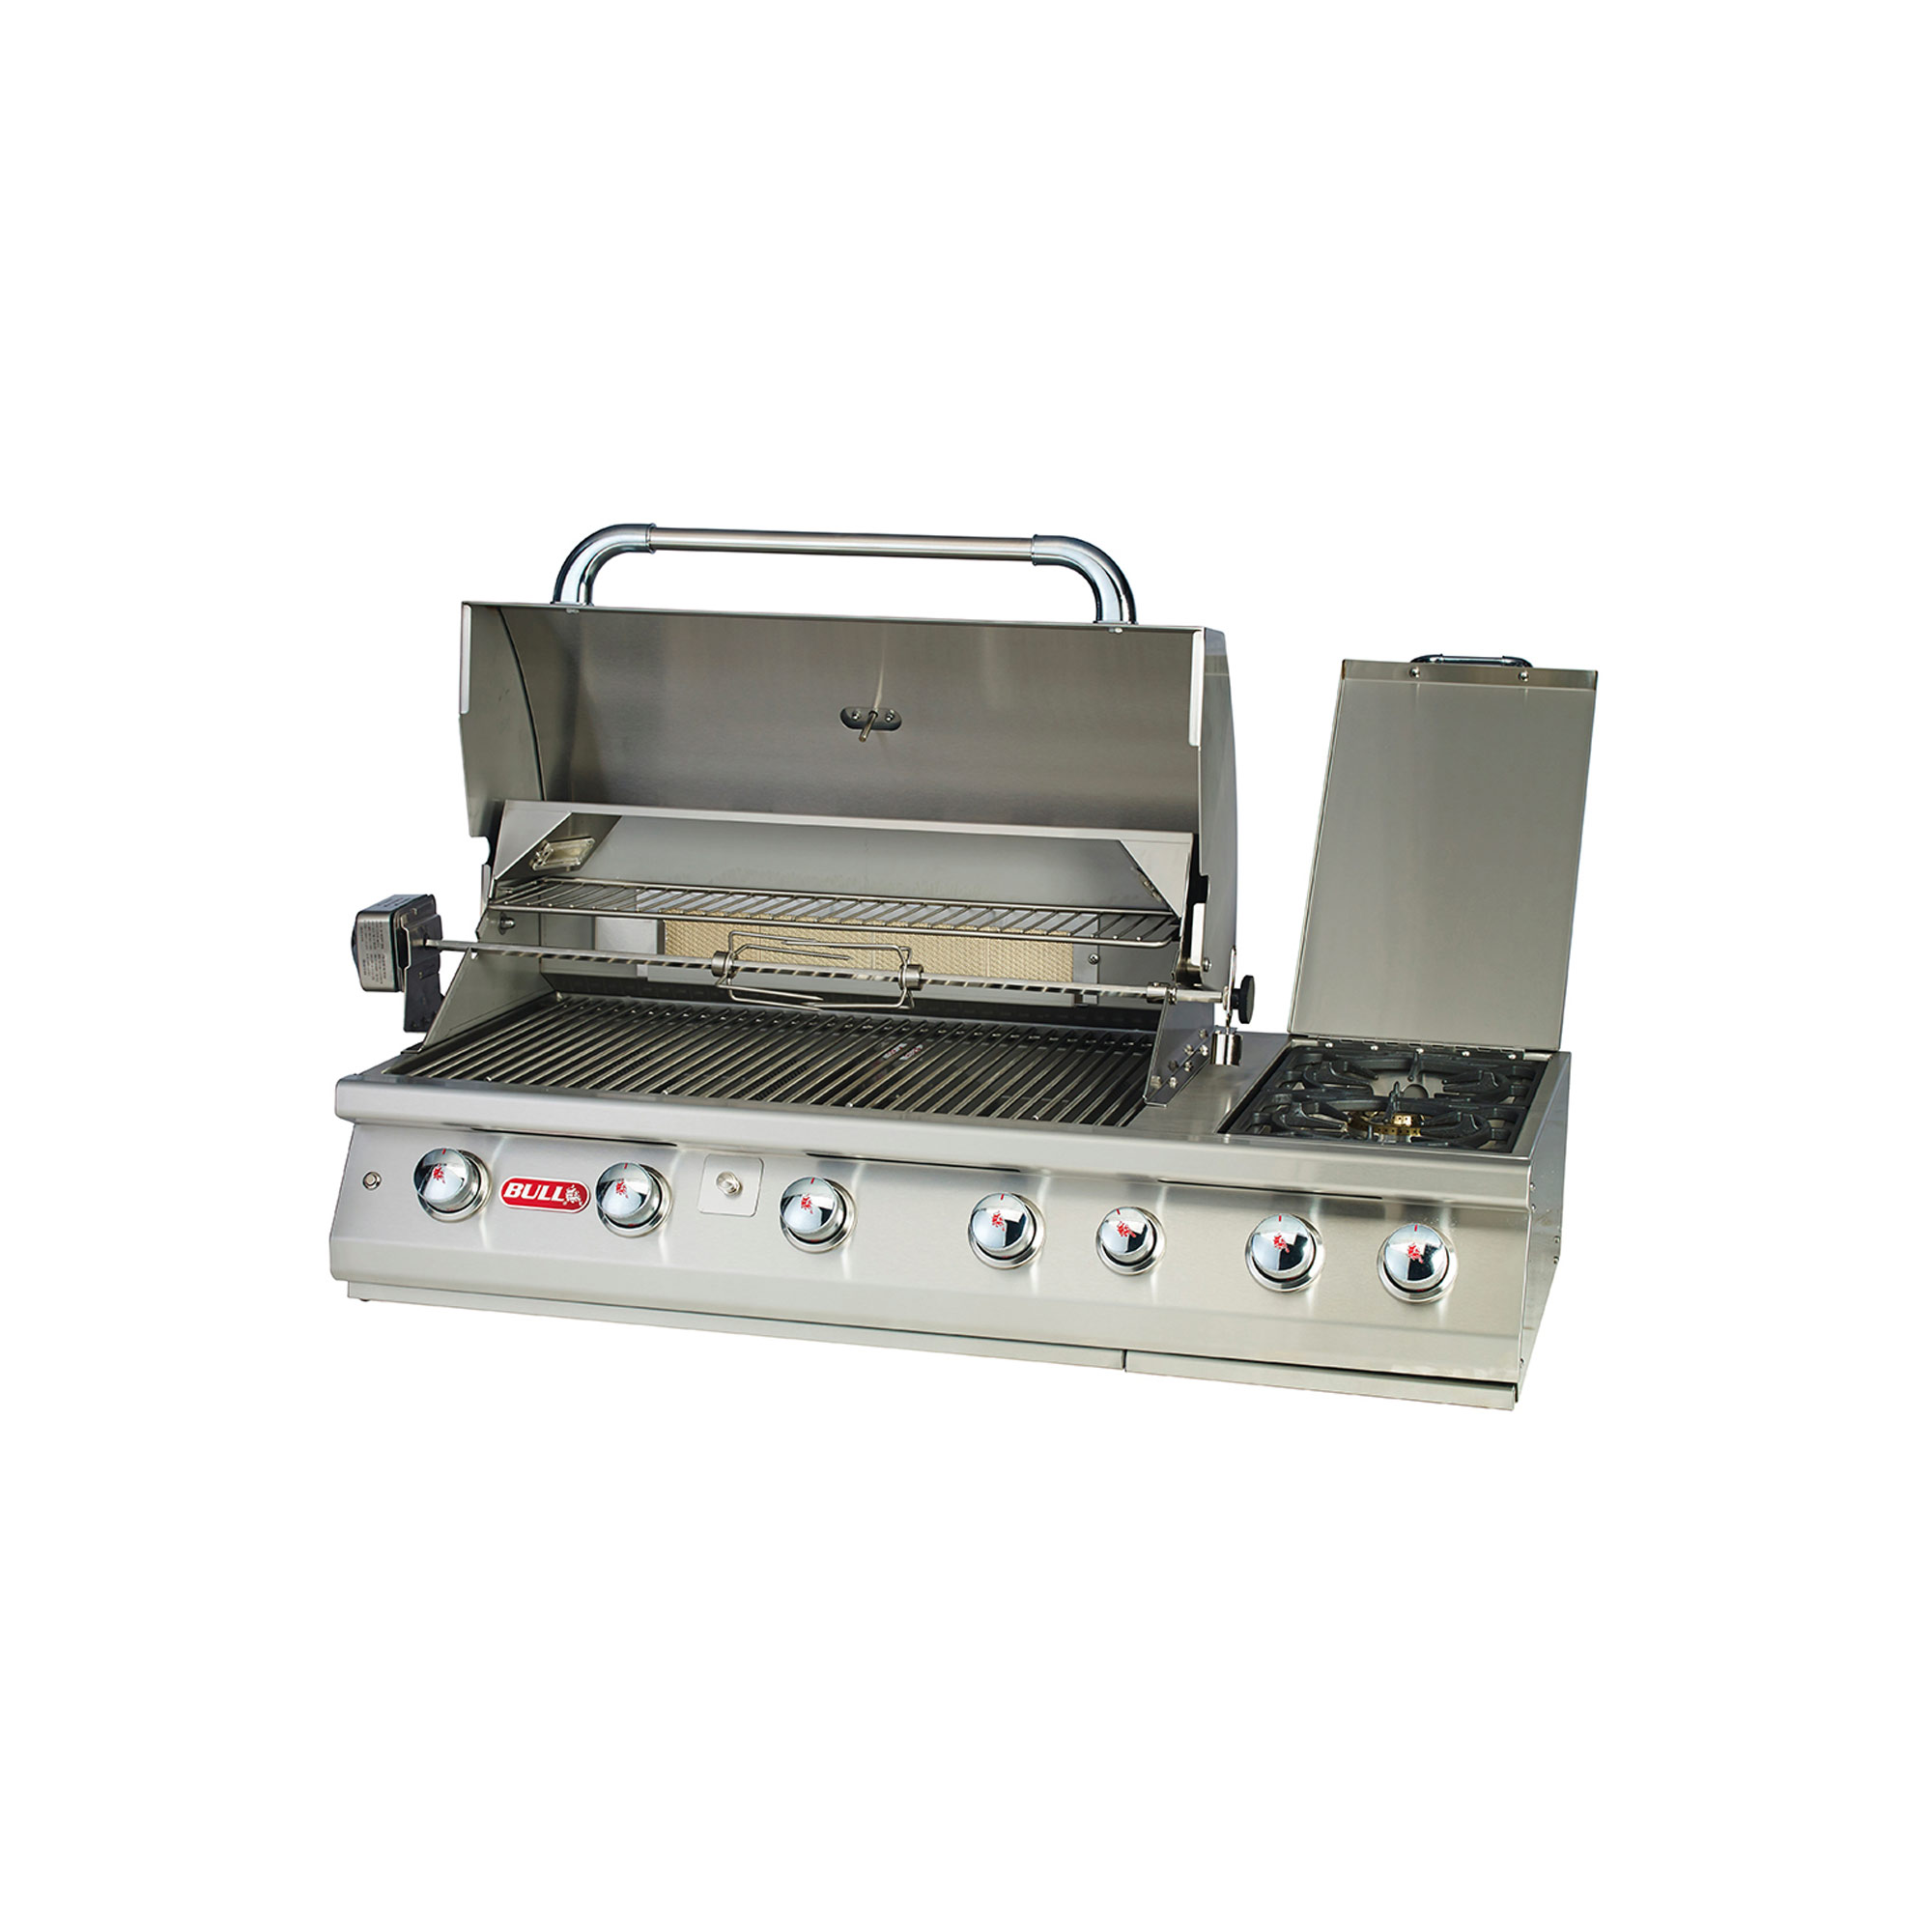 An image of Bull BBQ Component Built-in 7 Burner Gas BBQ Grill - Stainless Steel - LPG Gas